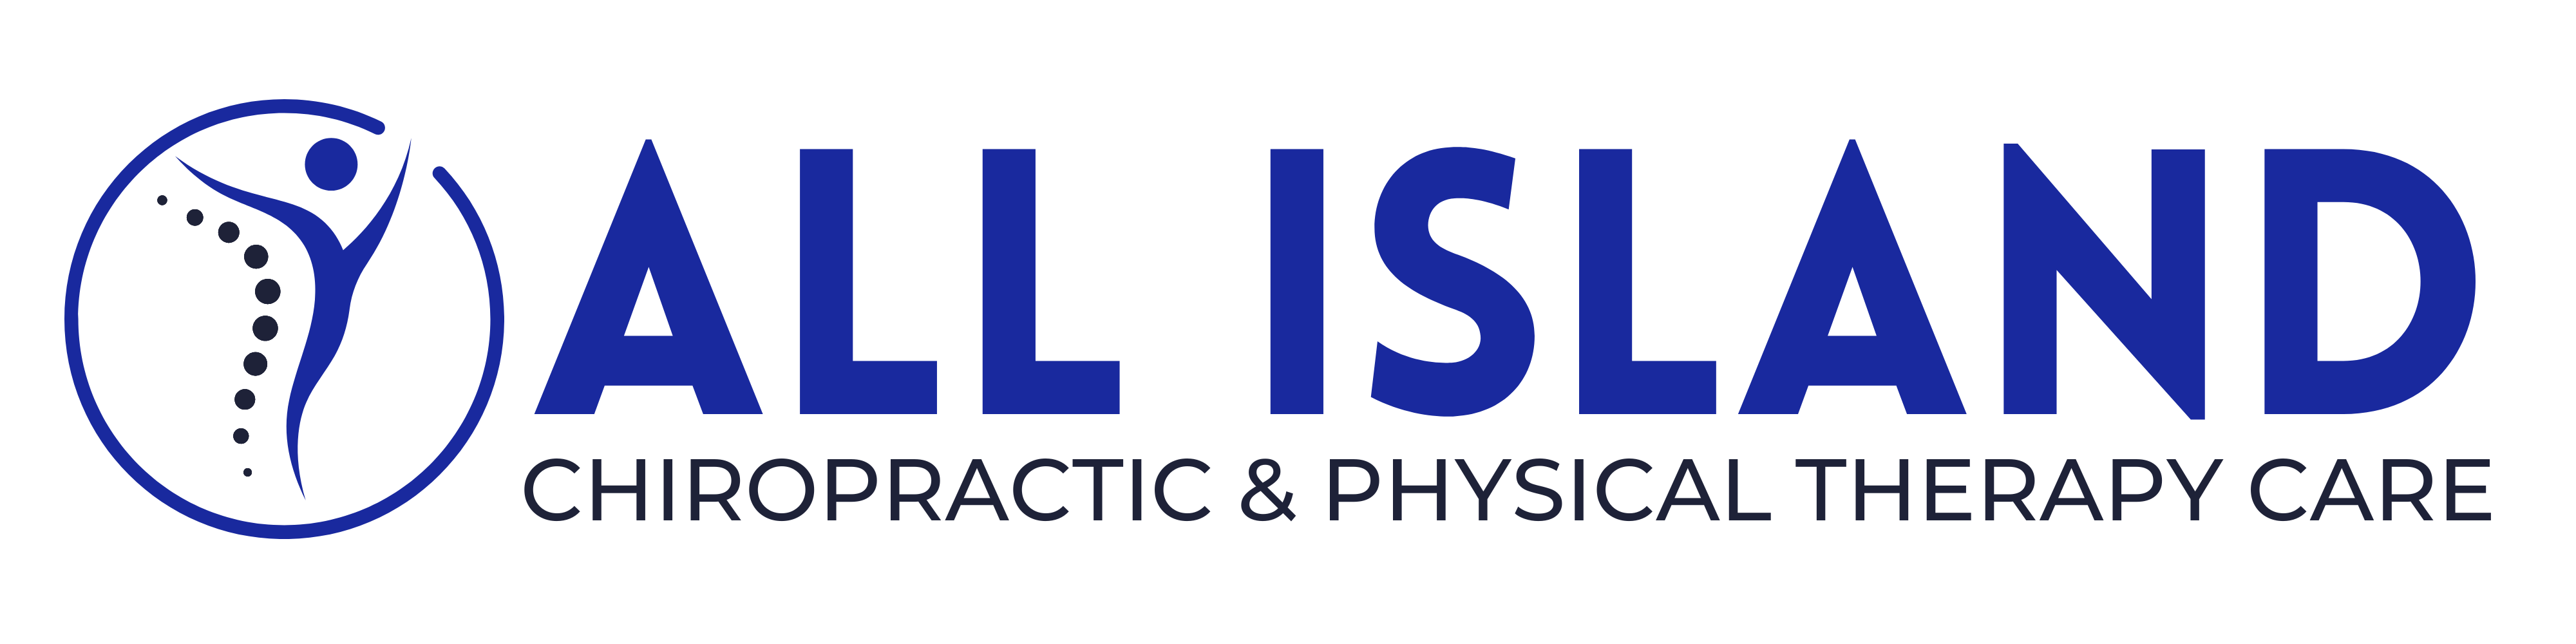 All Island Chiropractic and Physical Therapy